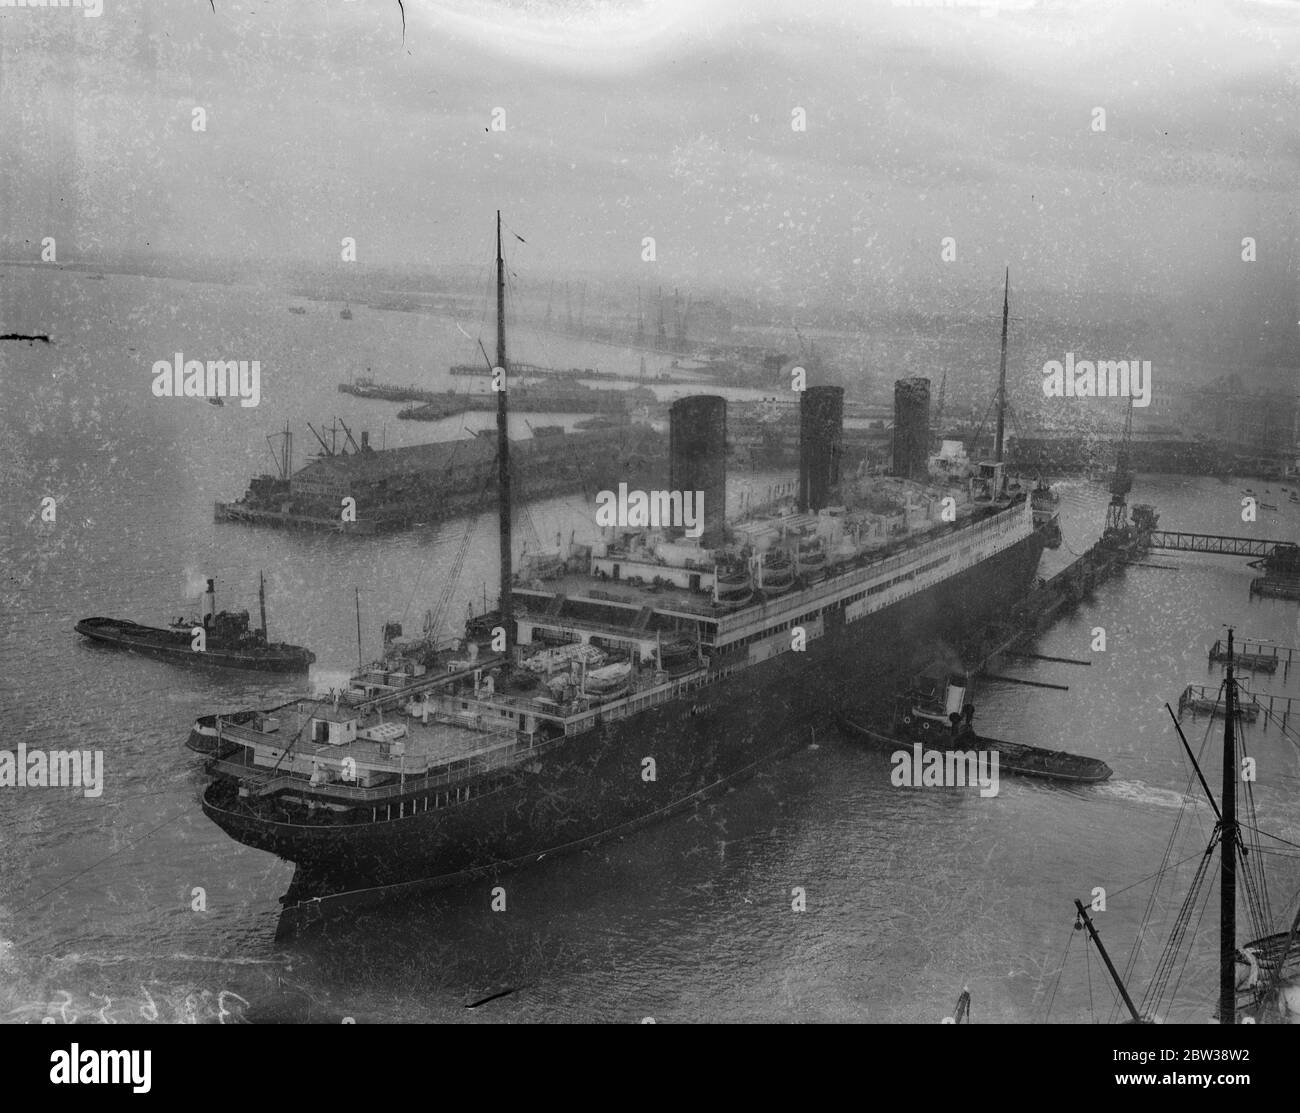 Berengaria  goes into floating dry dock for overhaul at Southampton . The cunard liner  Berengaria  was taken into the floating dry dock at Southampton for overhaul . Photo shows ; the  Berengaria  entering the floating dock at Southampton . 5 January 1934 30s, 30's, 1930s, 1930's, thirties, nineteen thirties Stock Photo